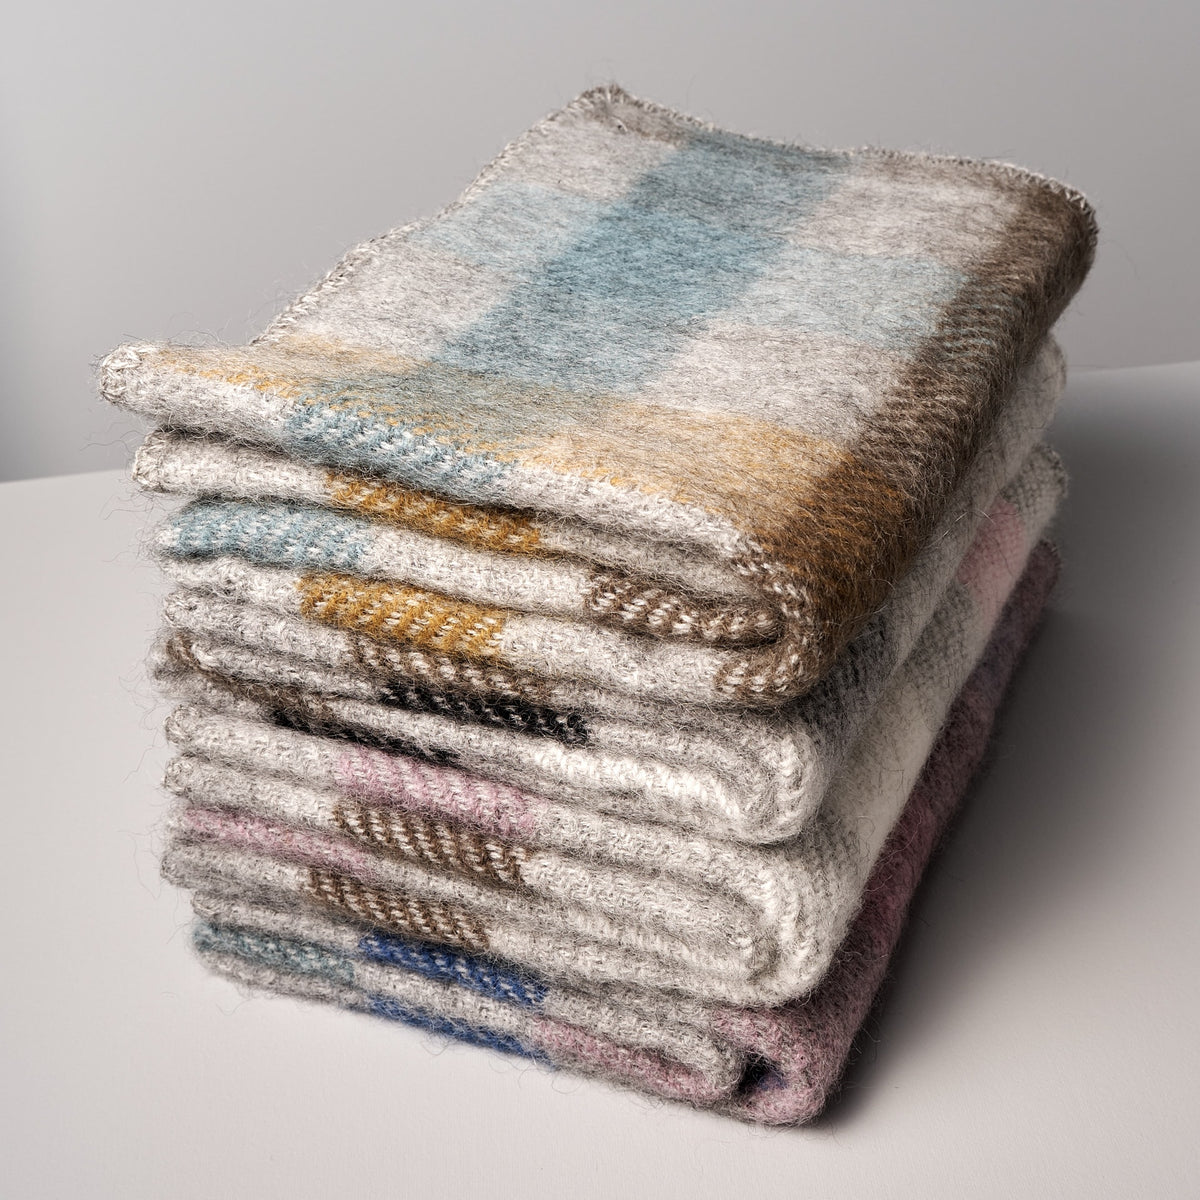 A stack of Gotland Wool Baby Throws - Multi Pink by Klippan on a white surface.